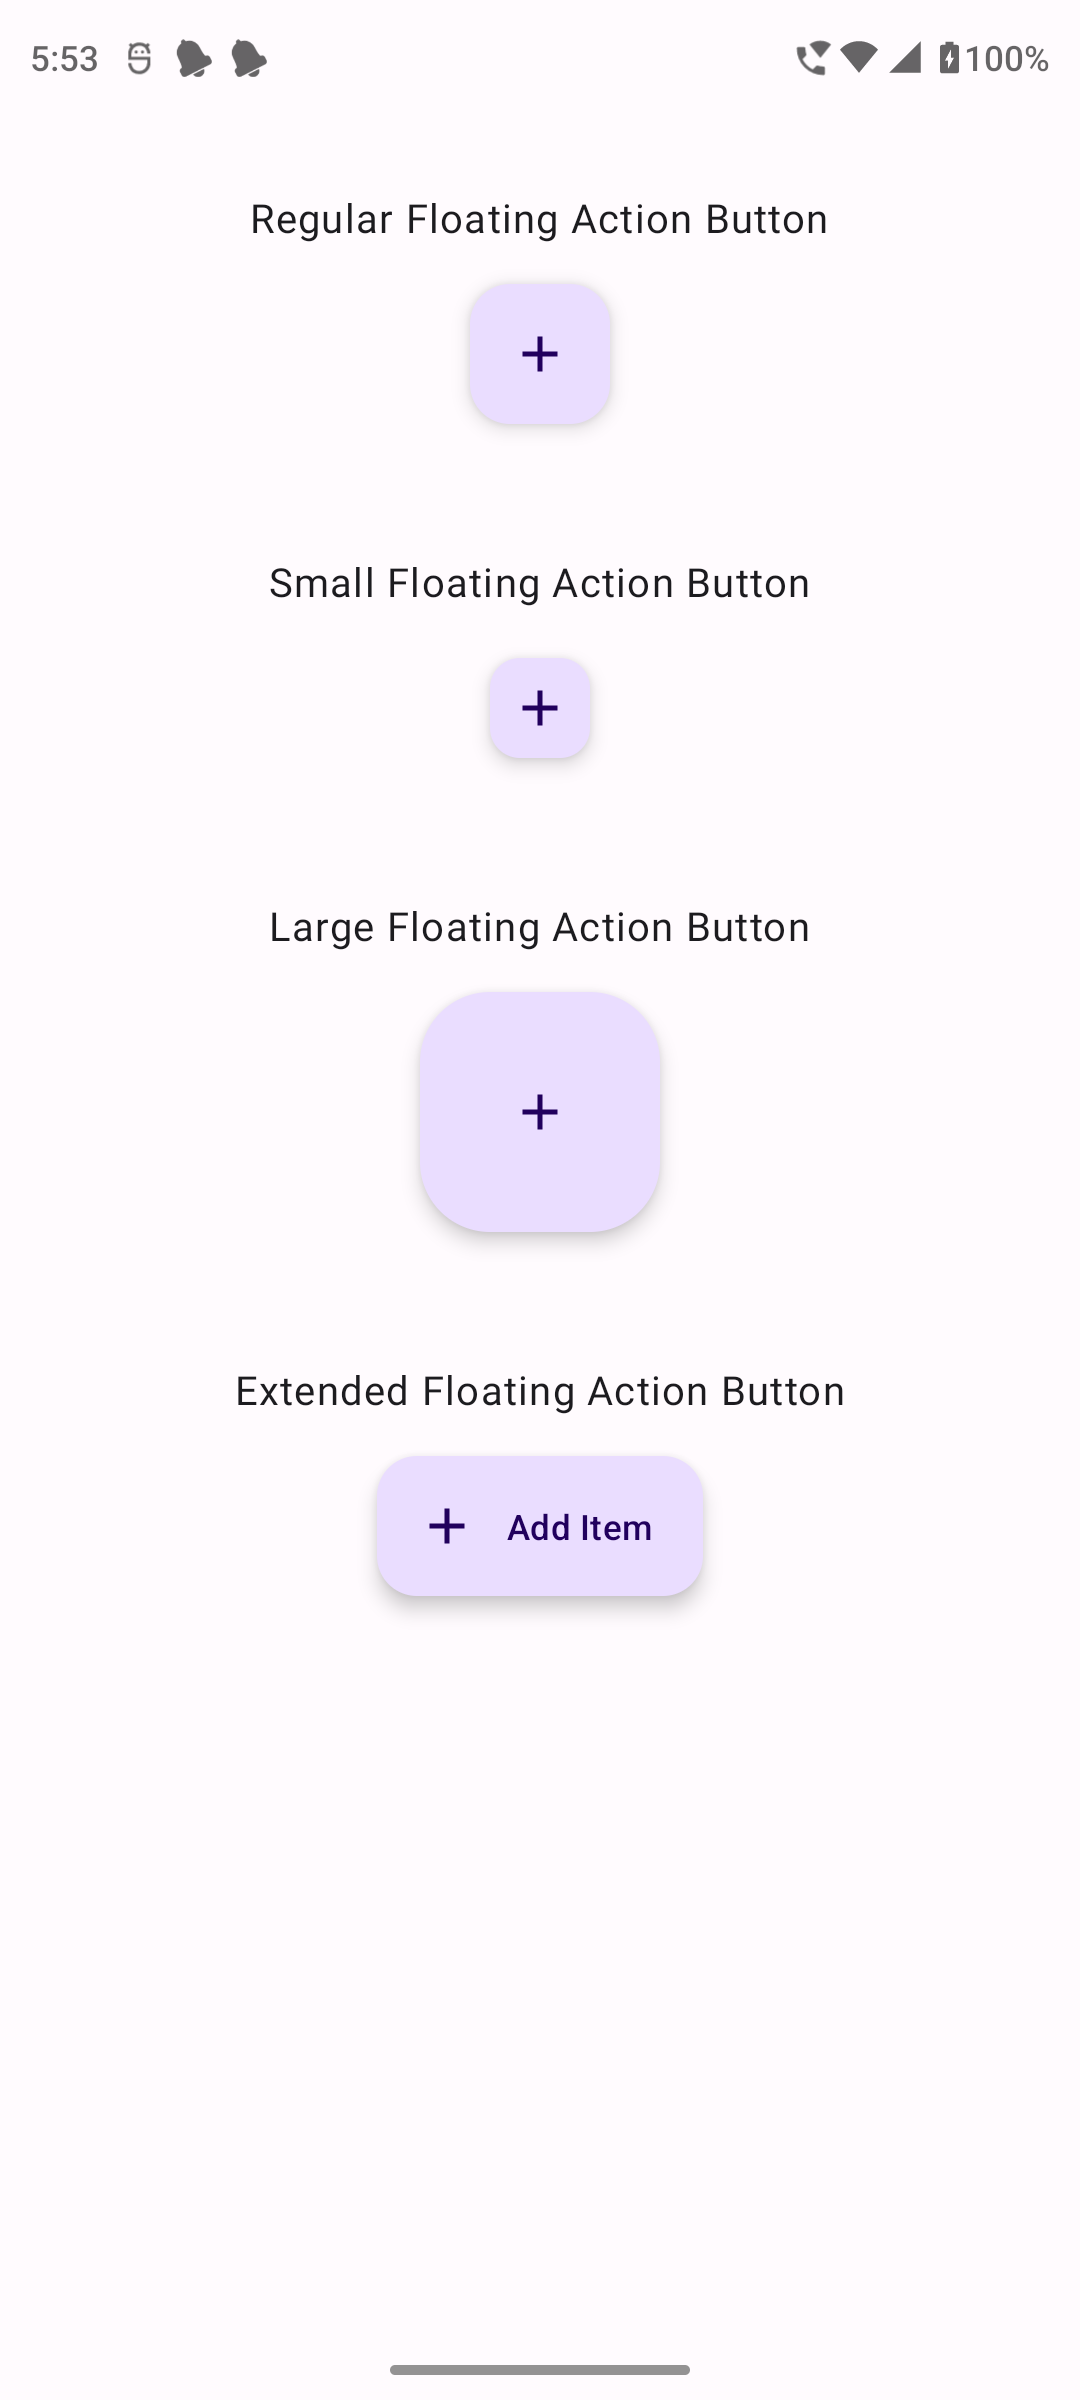 Jetpack Compose Floating Action Buttons Example